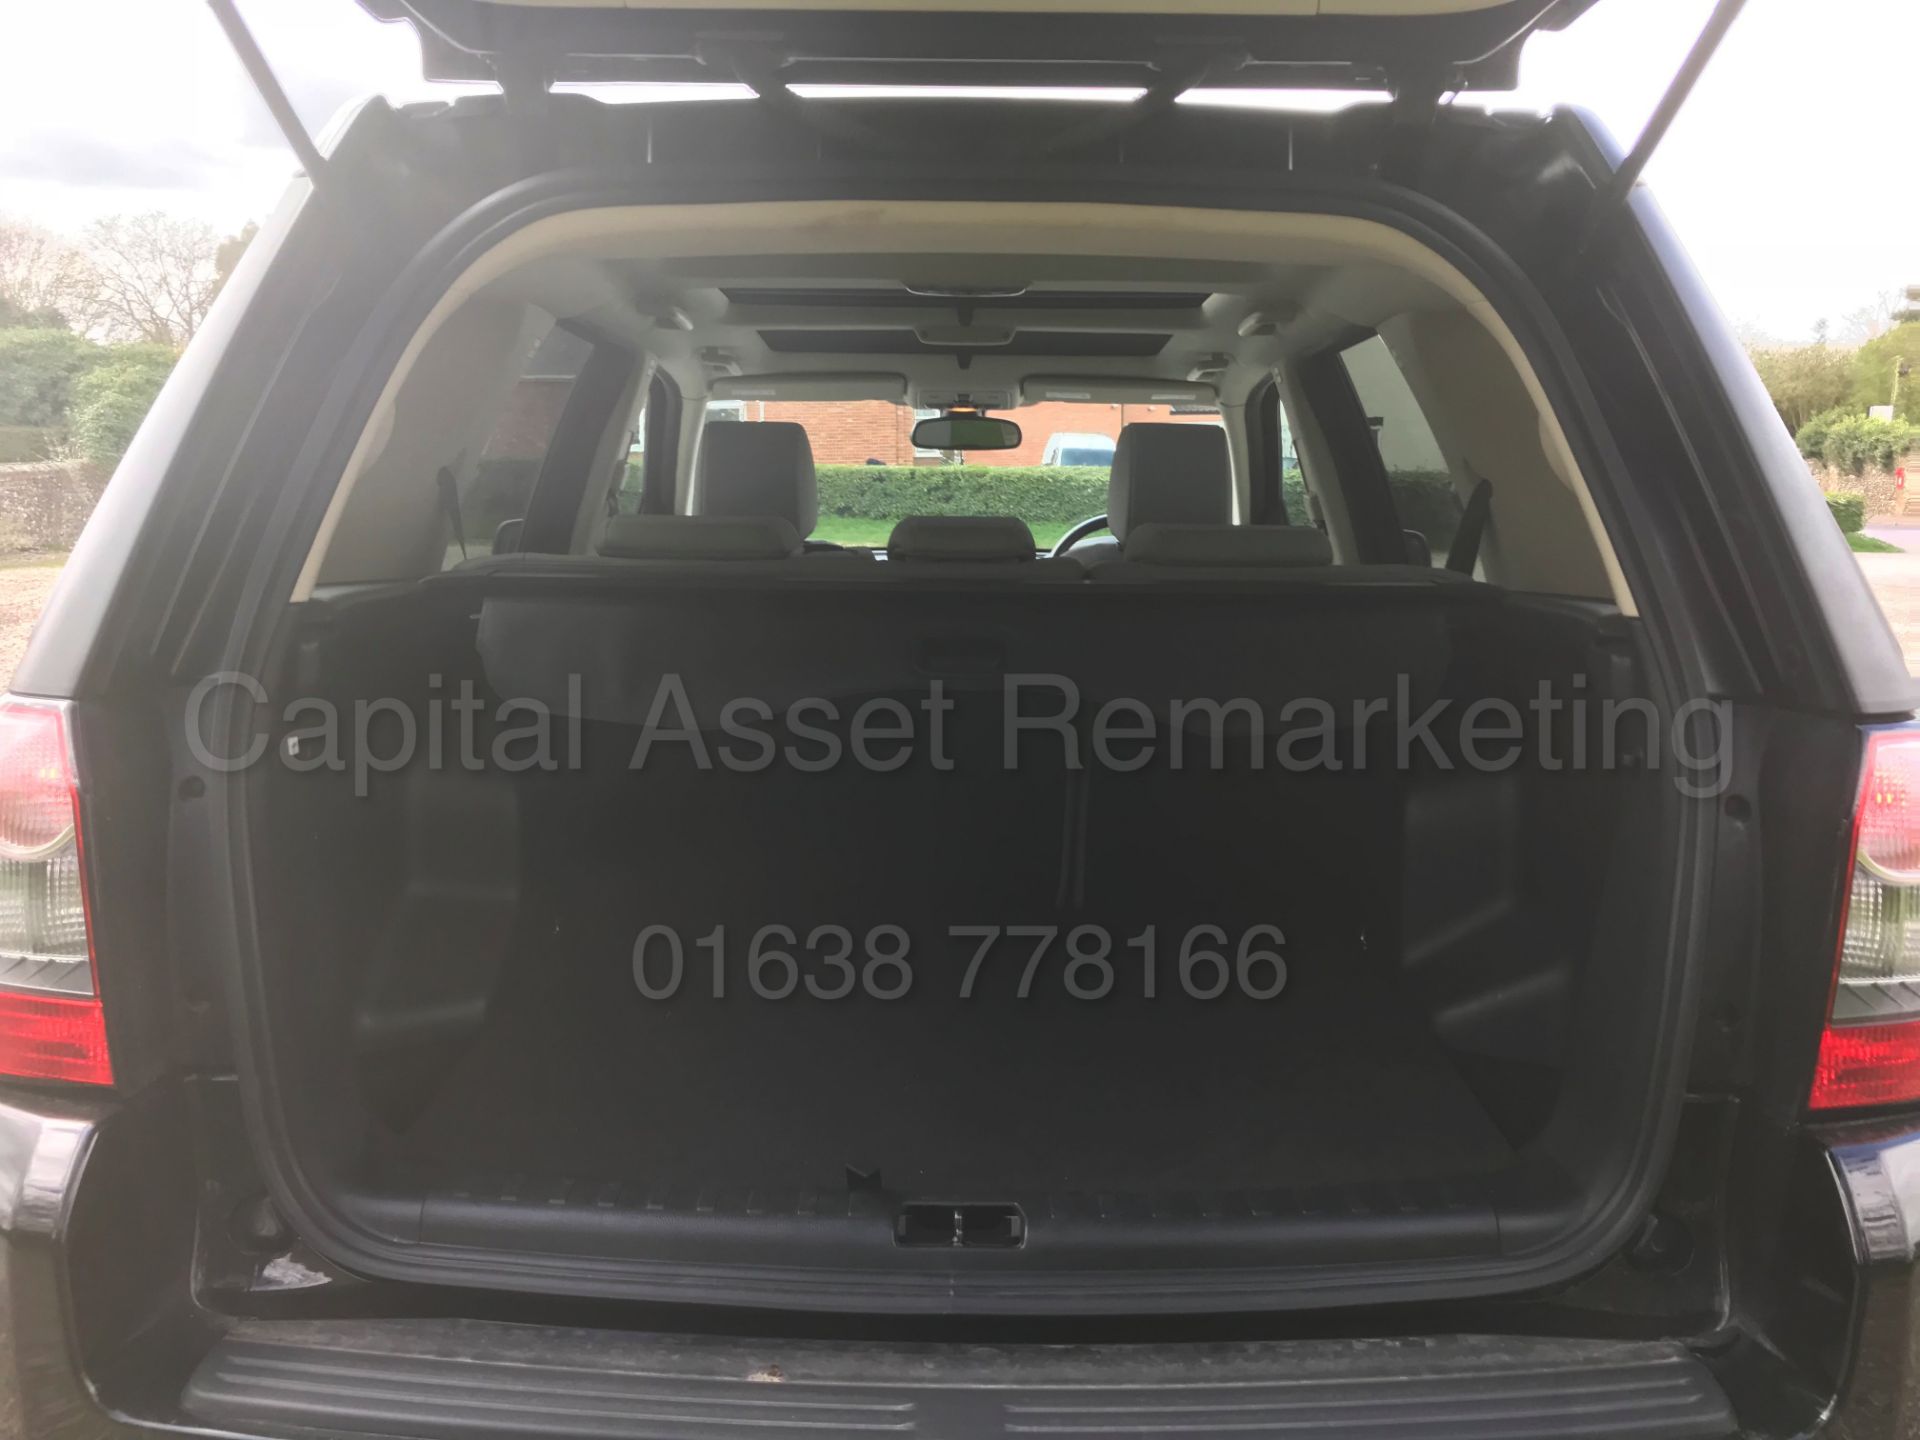 (On Sale) LAND ROVER FREELANDER 'HSE EDITION' (2011) '2.2 SD4 - AUTO' *SAT NAV - LEATHER - PAN ROOF* - Image 26 of 45